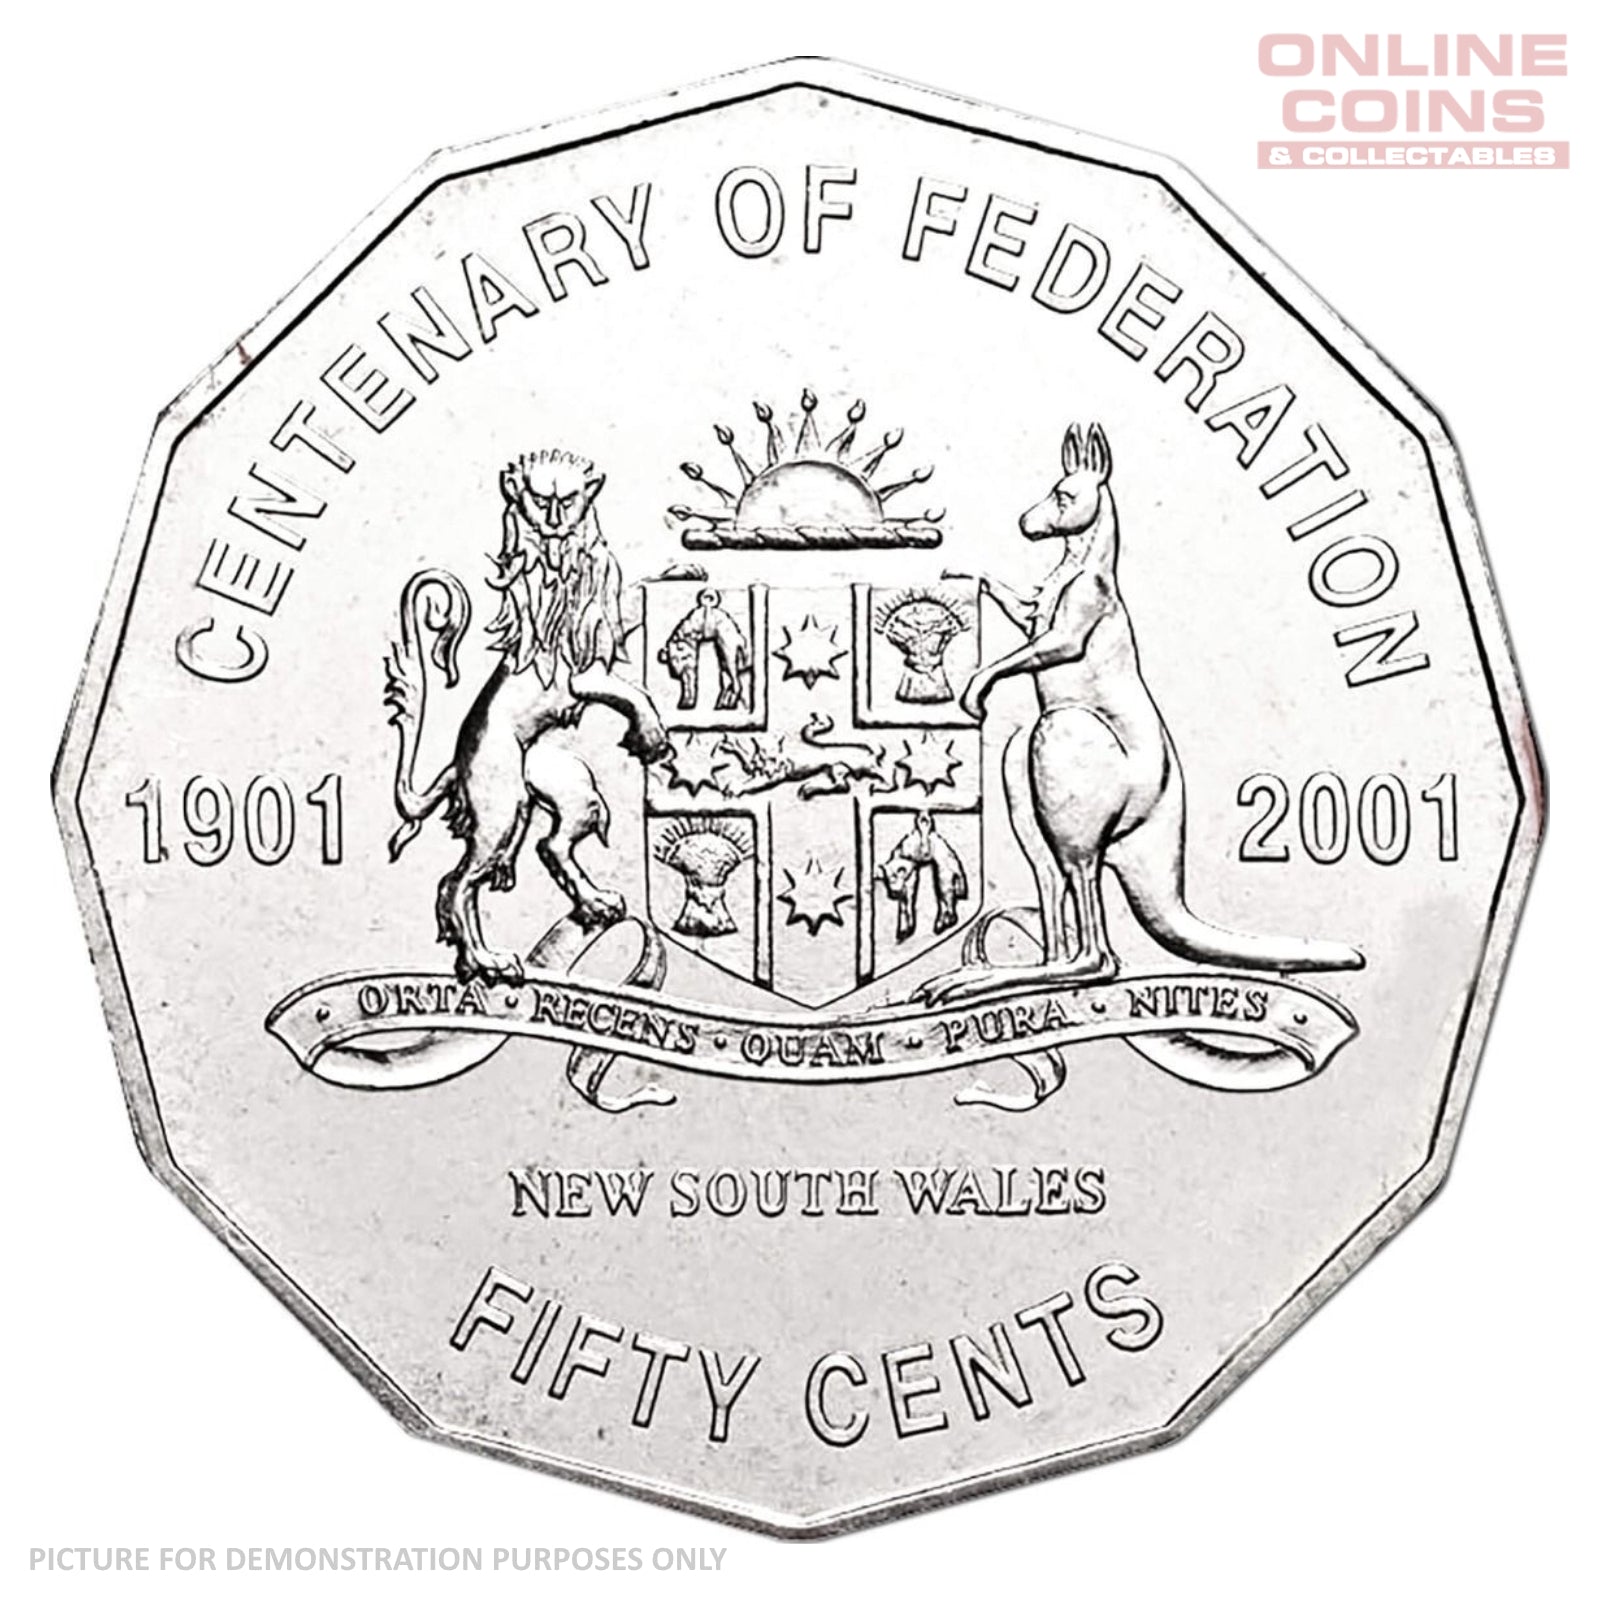 2001 RAM Centenary of Federation 50c Circulating Coin - NEW SOUTH WALES